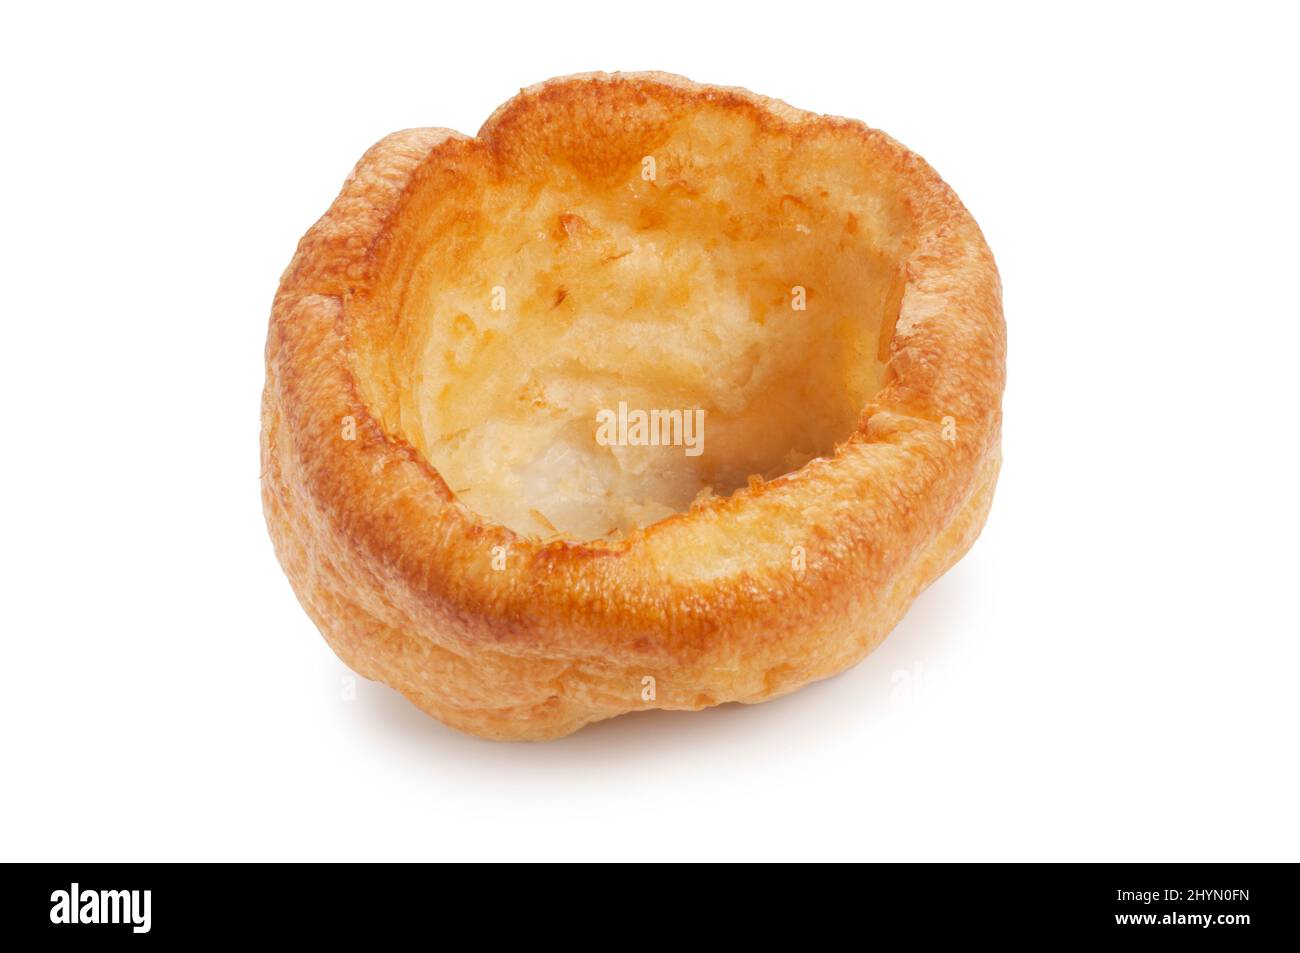 Studio shot of a baked Yorkshire Pudding cut out against a white background - John Gollop Stock Photo